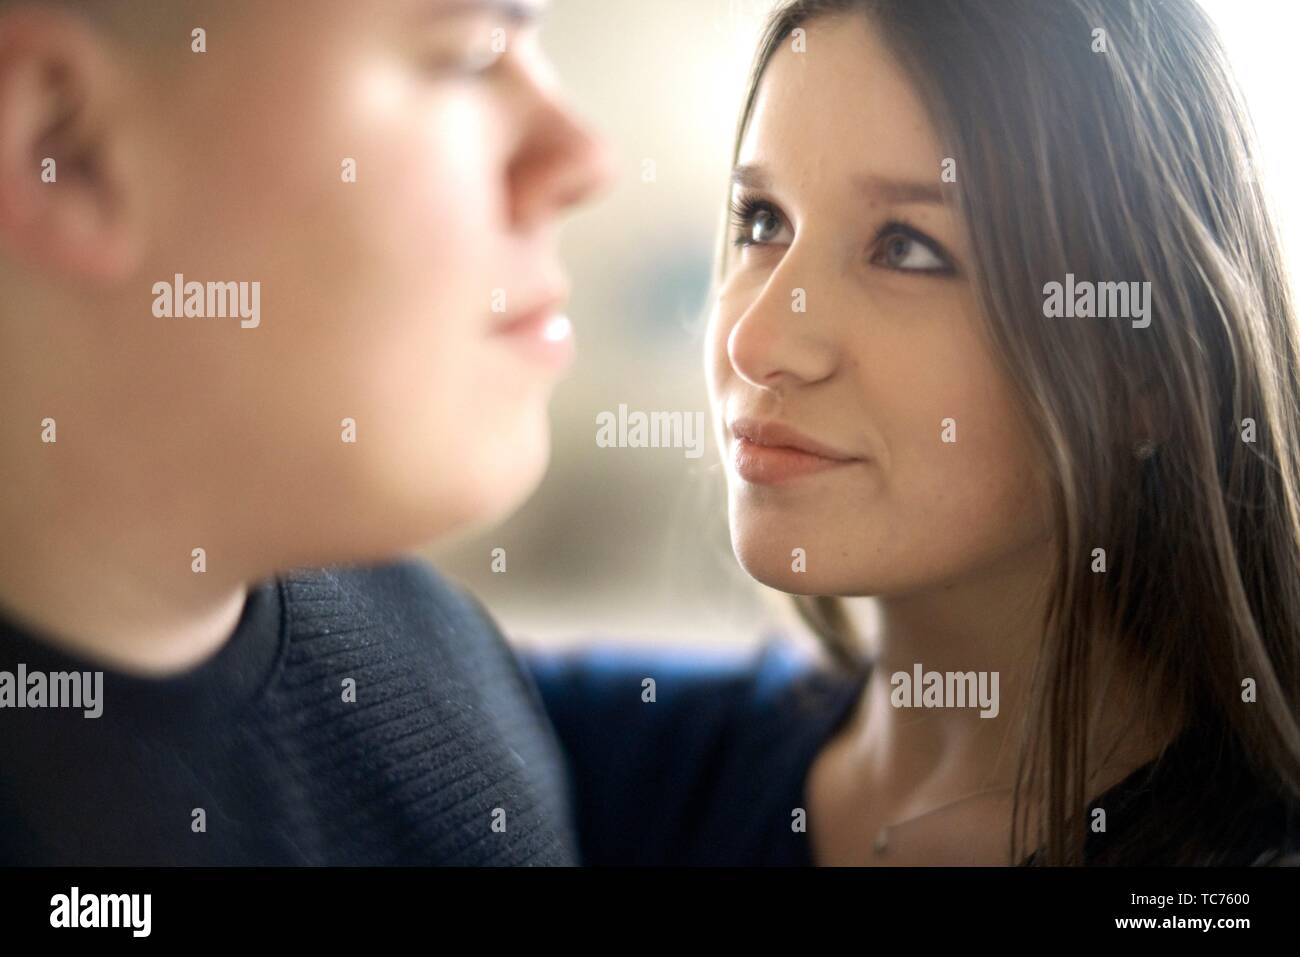 woman looking at man, in Cottbus, Brandenburg, Germany Stock Photo